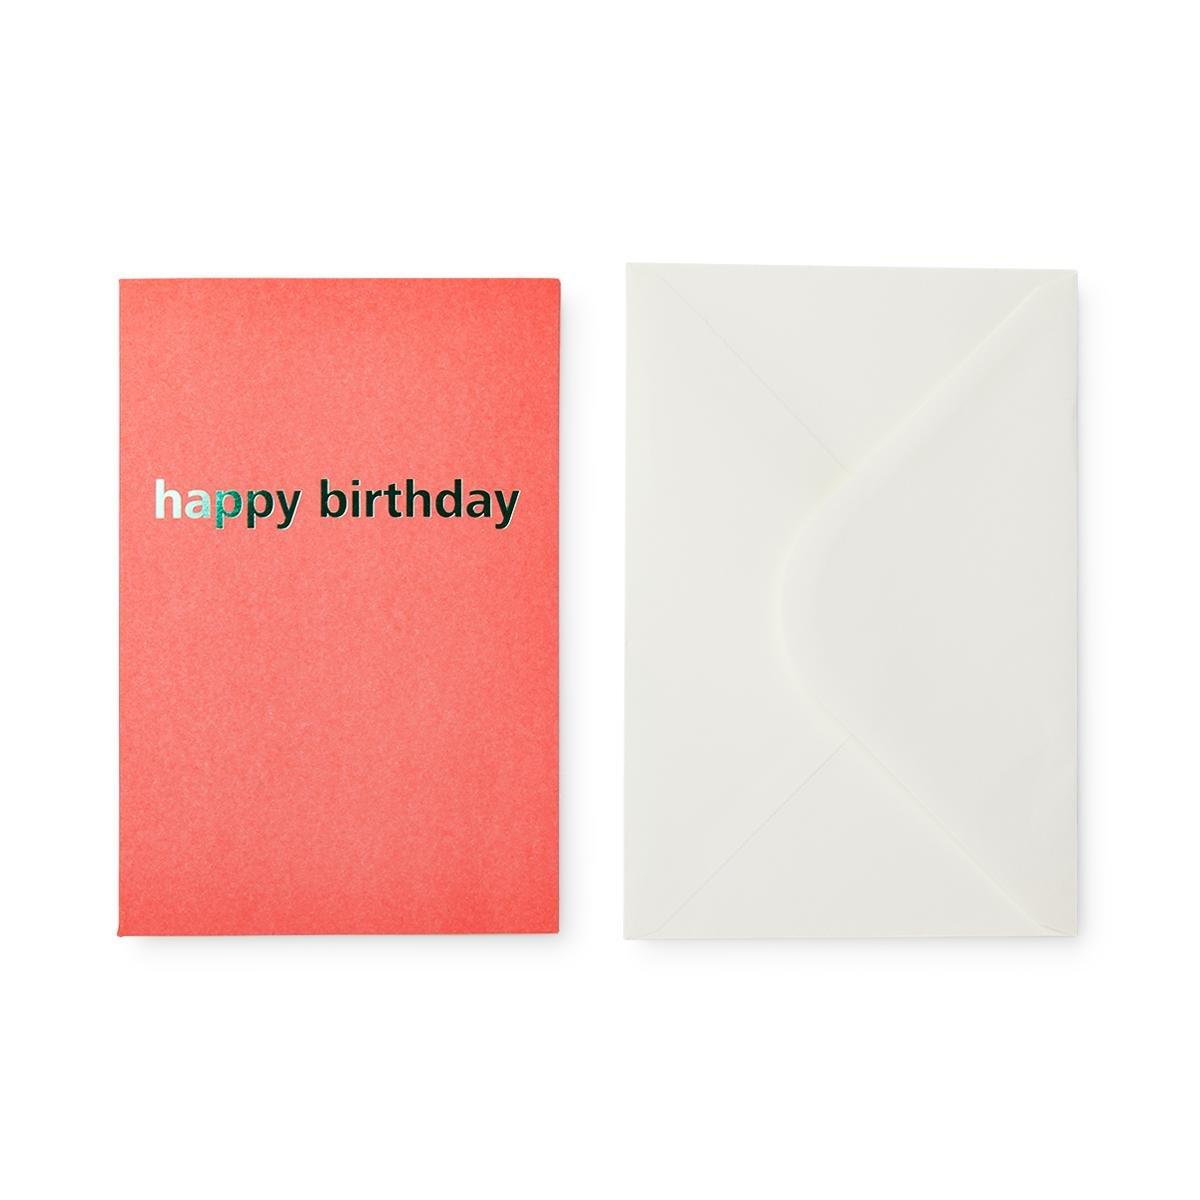 Red greeting card